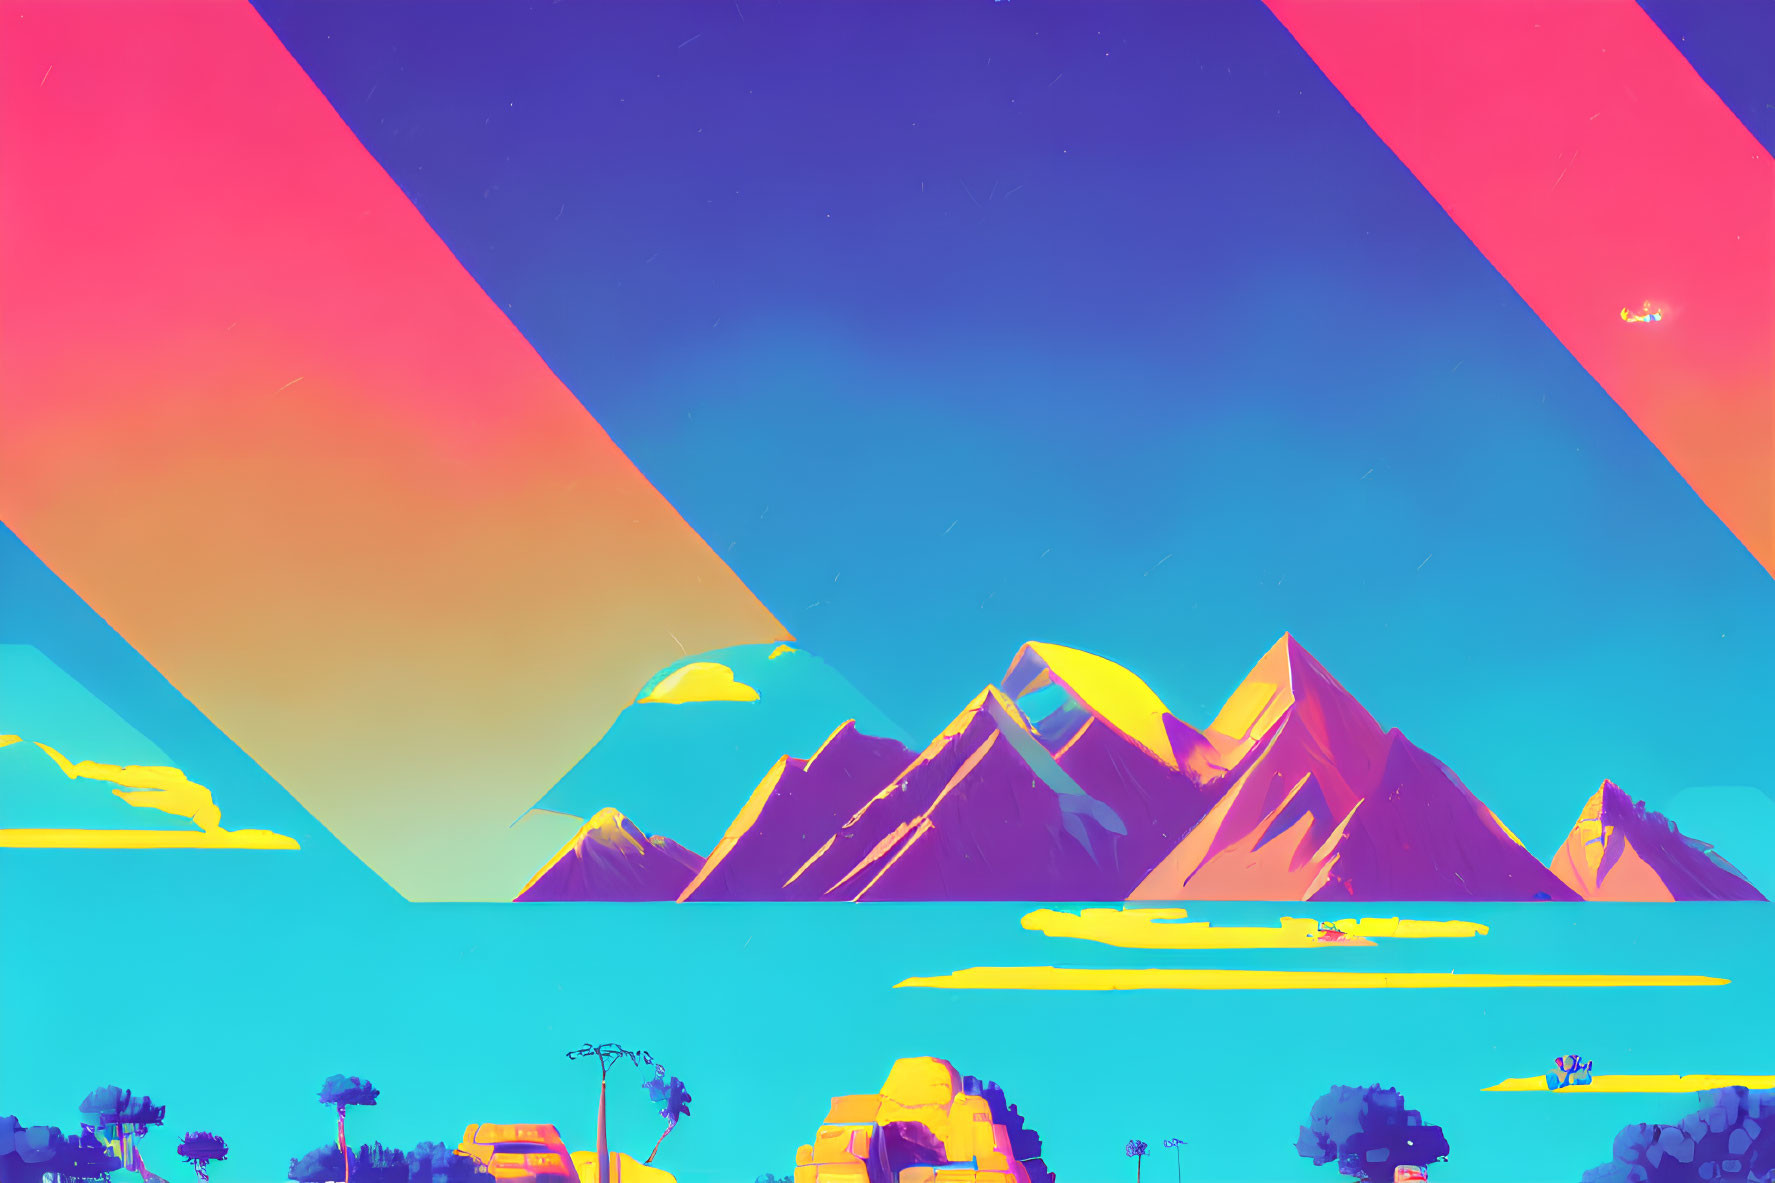 Colorful surreal landscape with vibrant skies and sharp mountain peaks